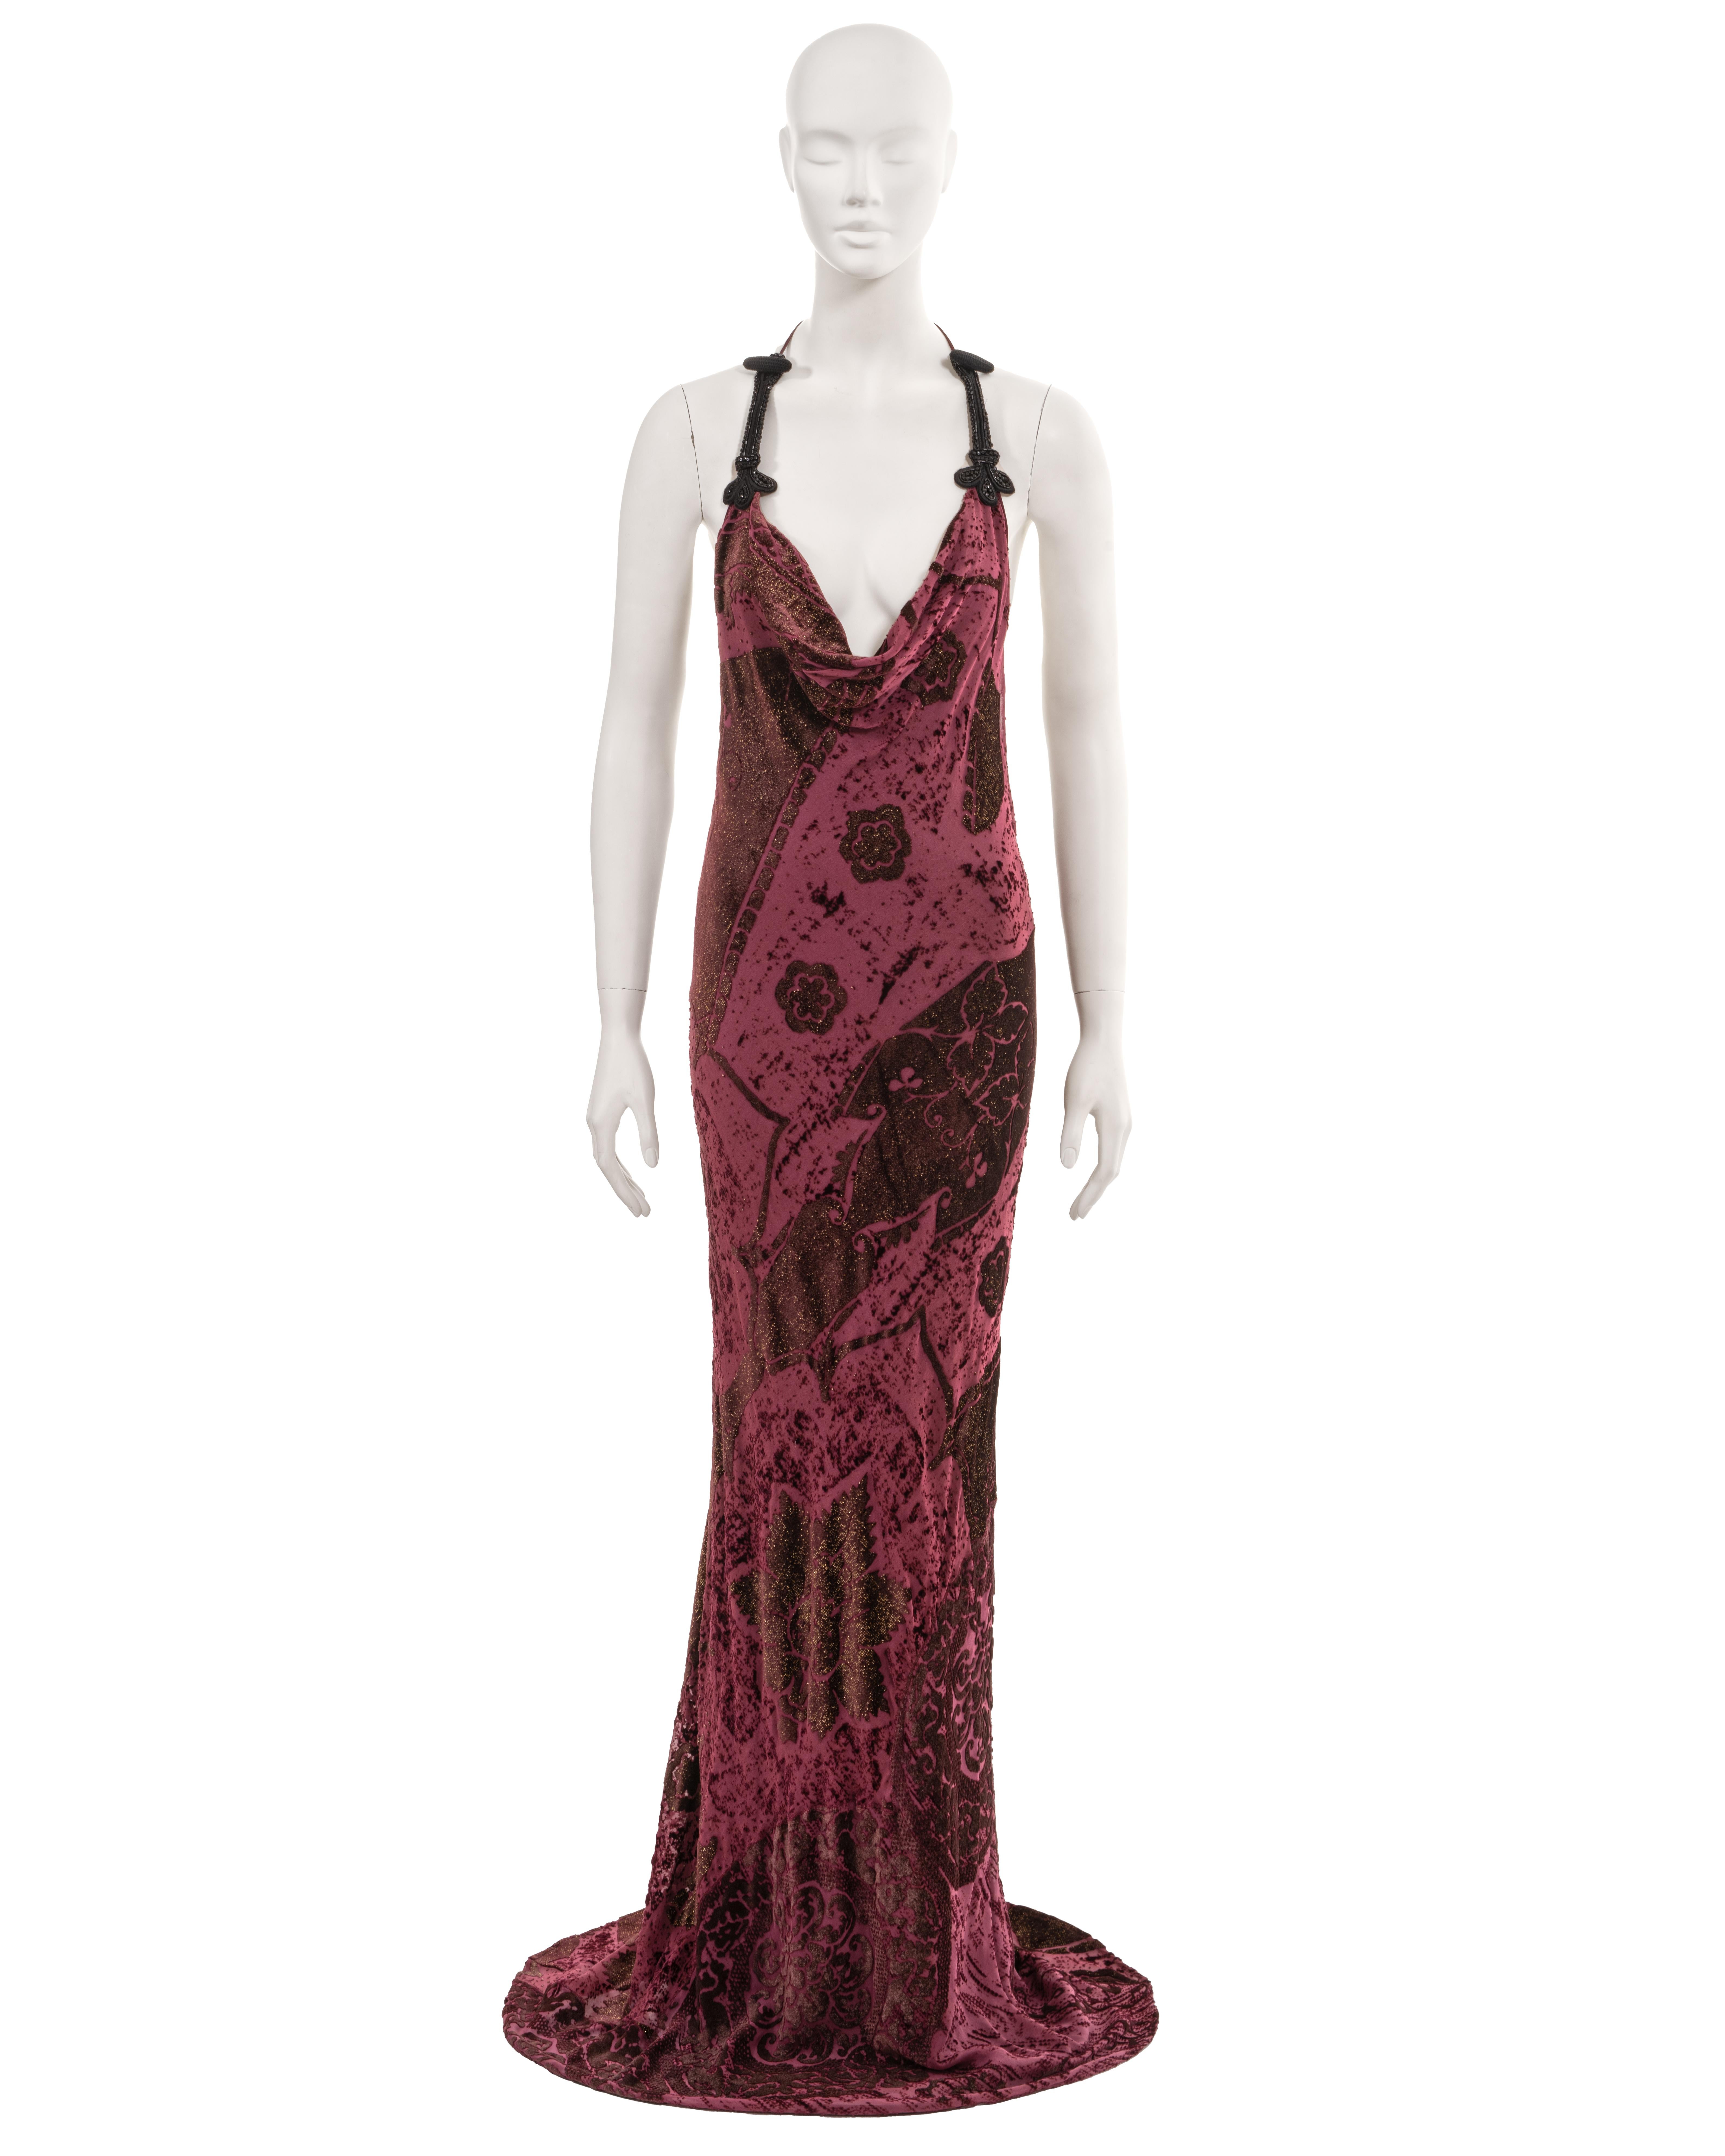 ▪ Roberto Cavalli halter neck evening dress
▪ Fall-Winter 2004
▪ Burgundy silk-rayon cut-velvet with metallic gold flecking
▪ Plunging cowl neck 
▪ Halterneck string ties with decorative beaded frog-fastening detail
▪ Floor length skirt with train